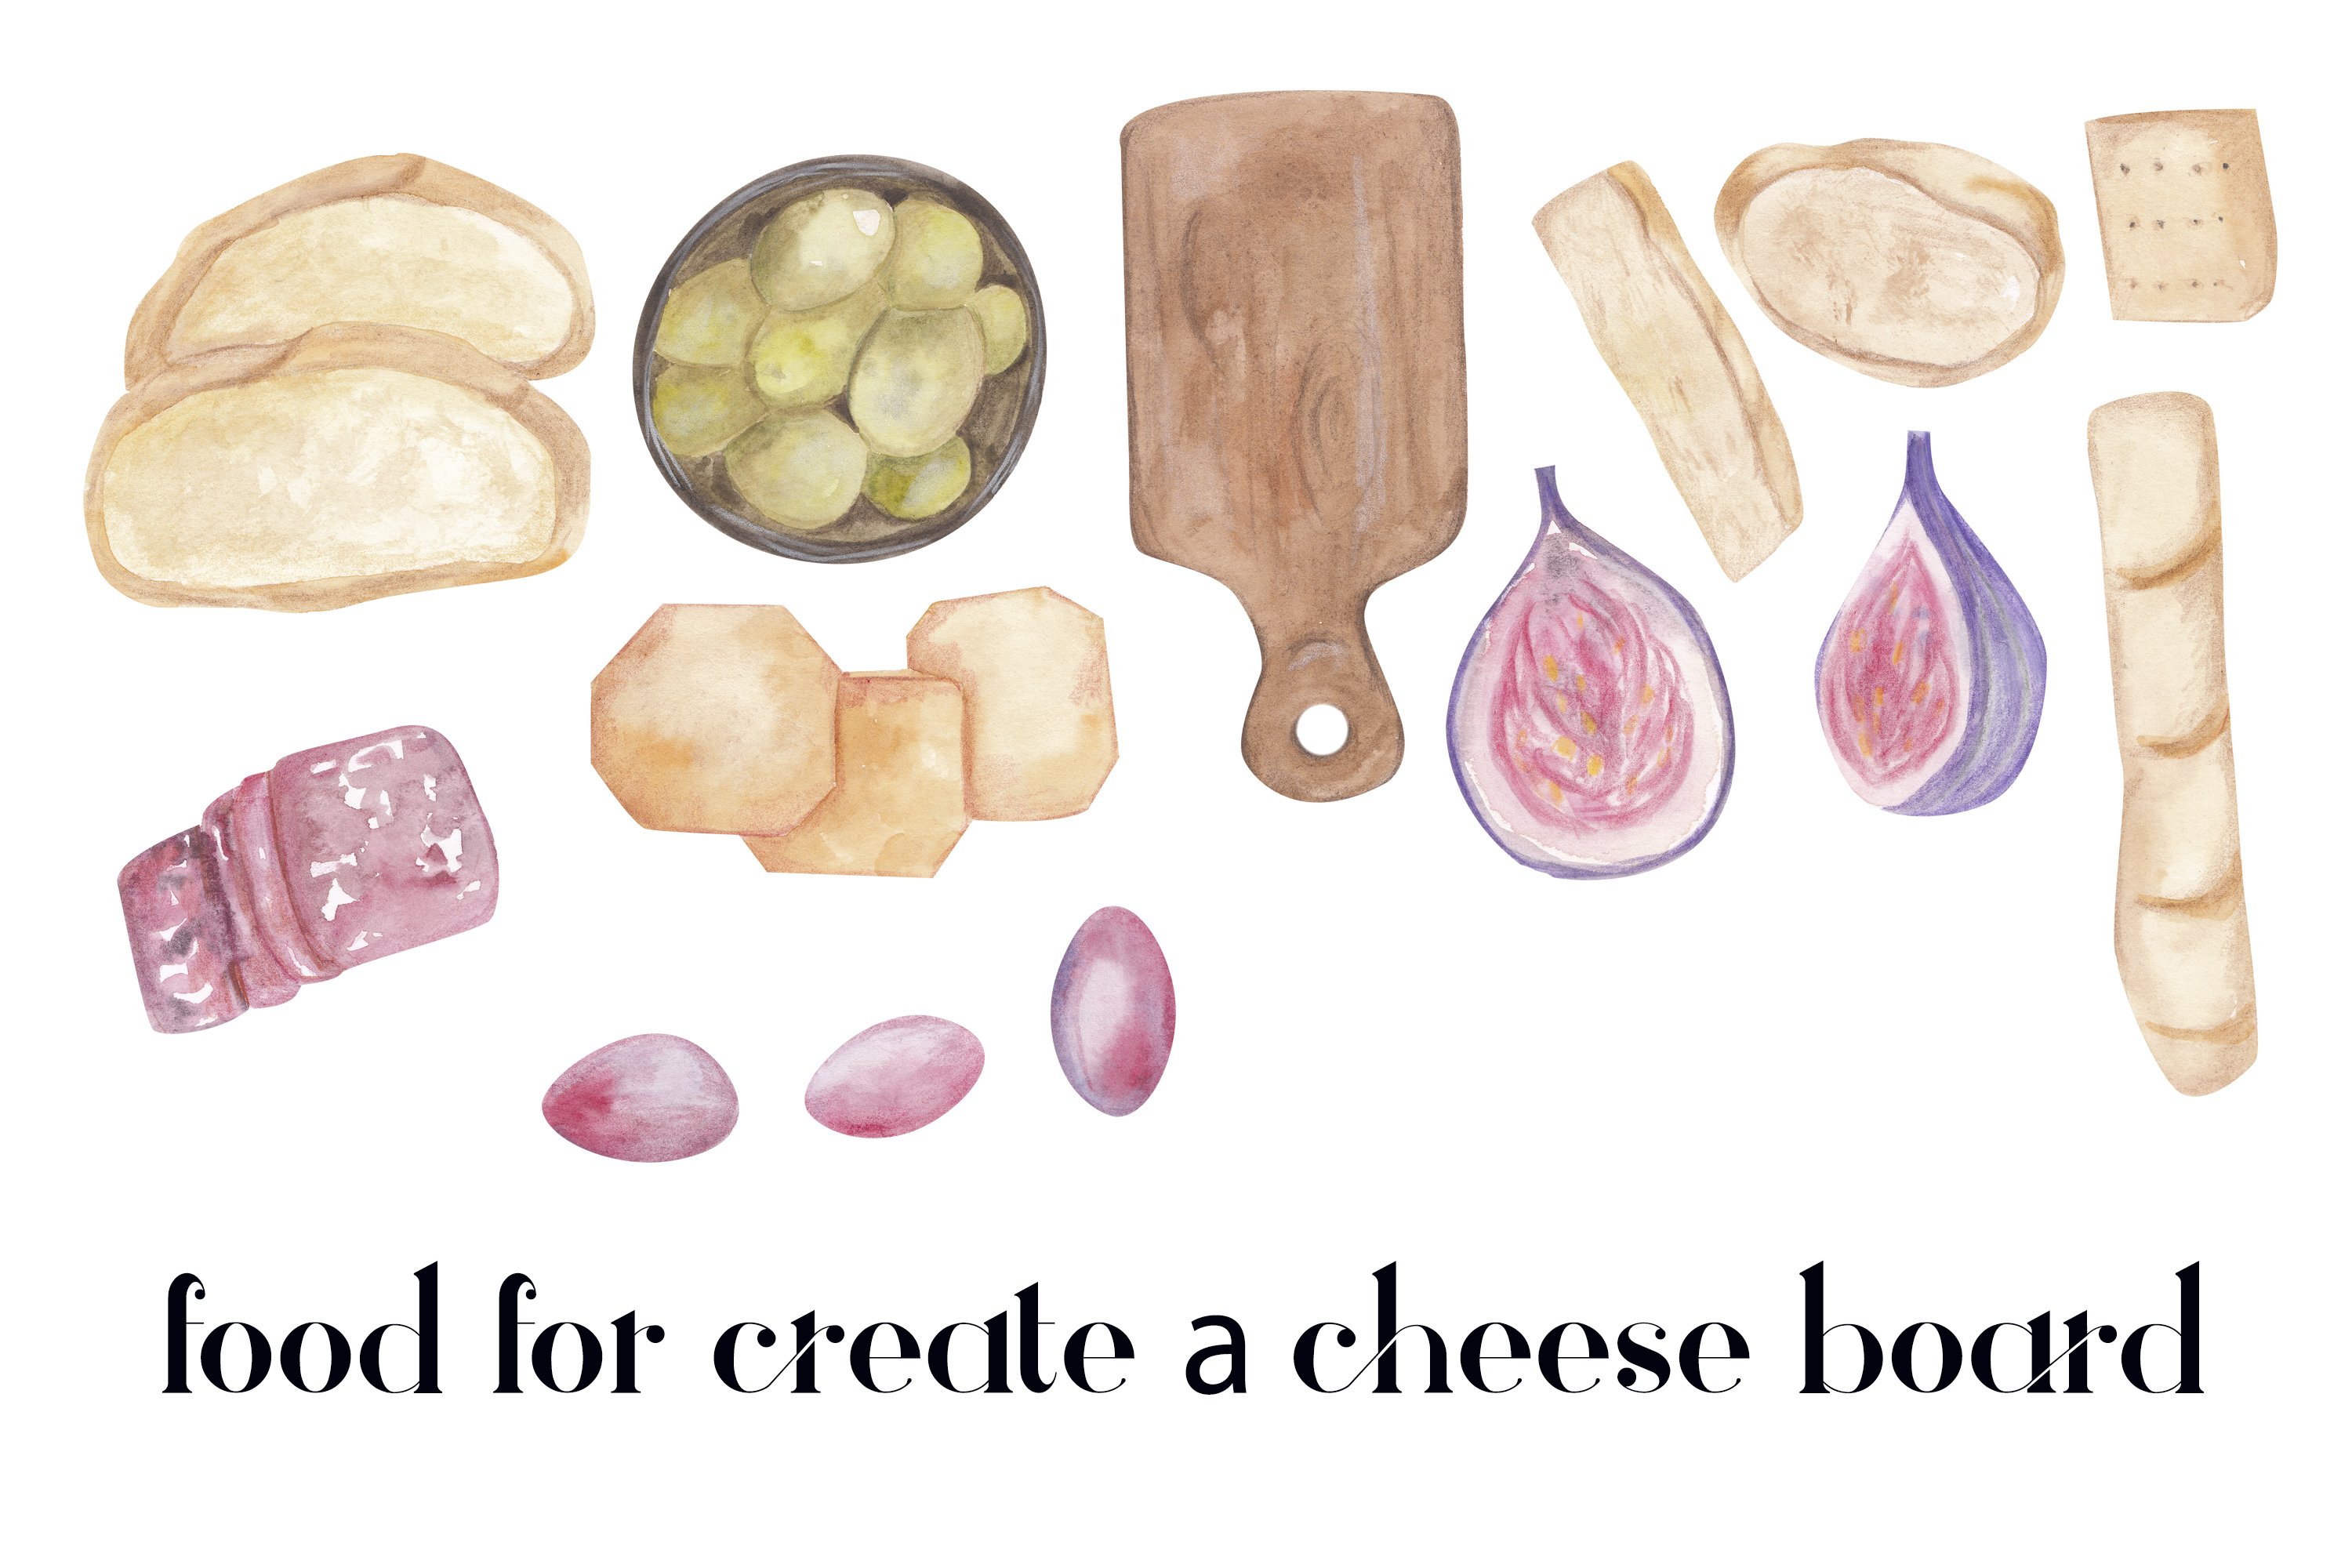 Beautiful watercolor images of hard cheeses and pastries.